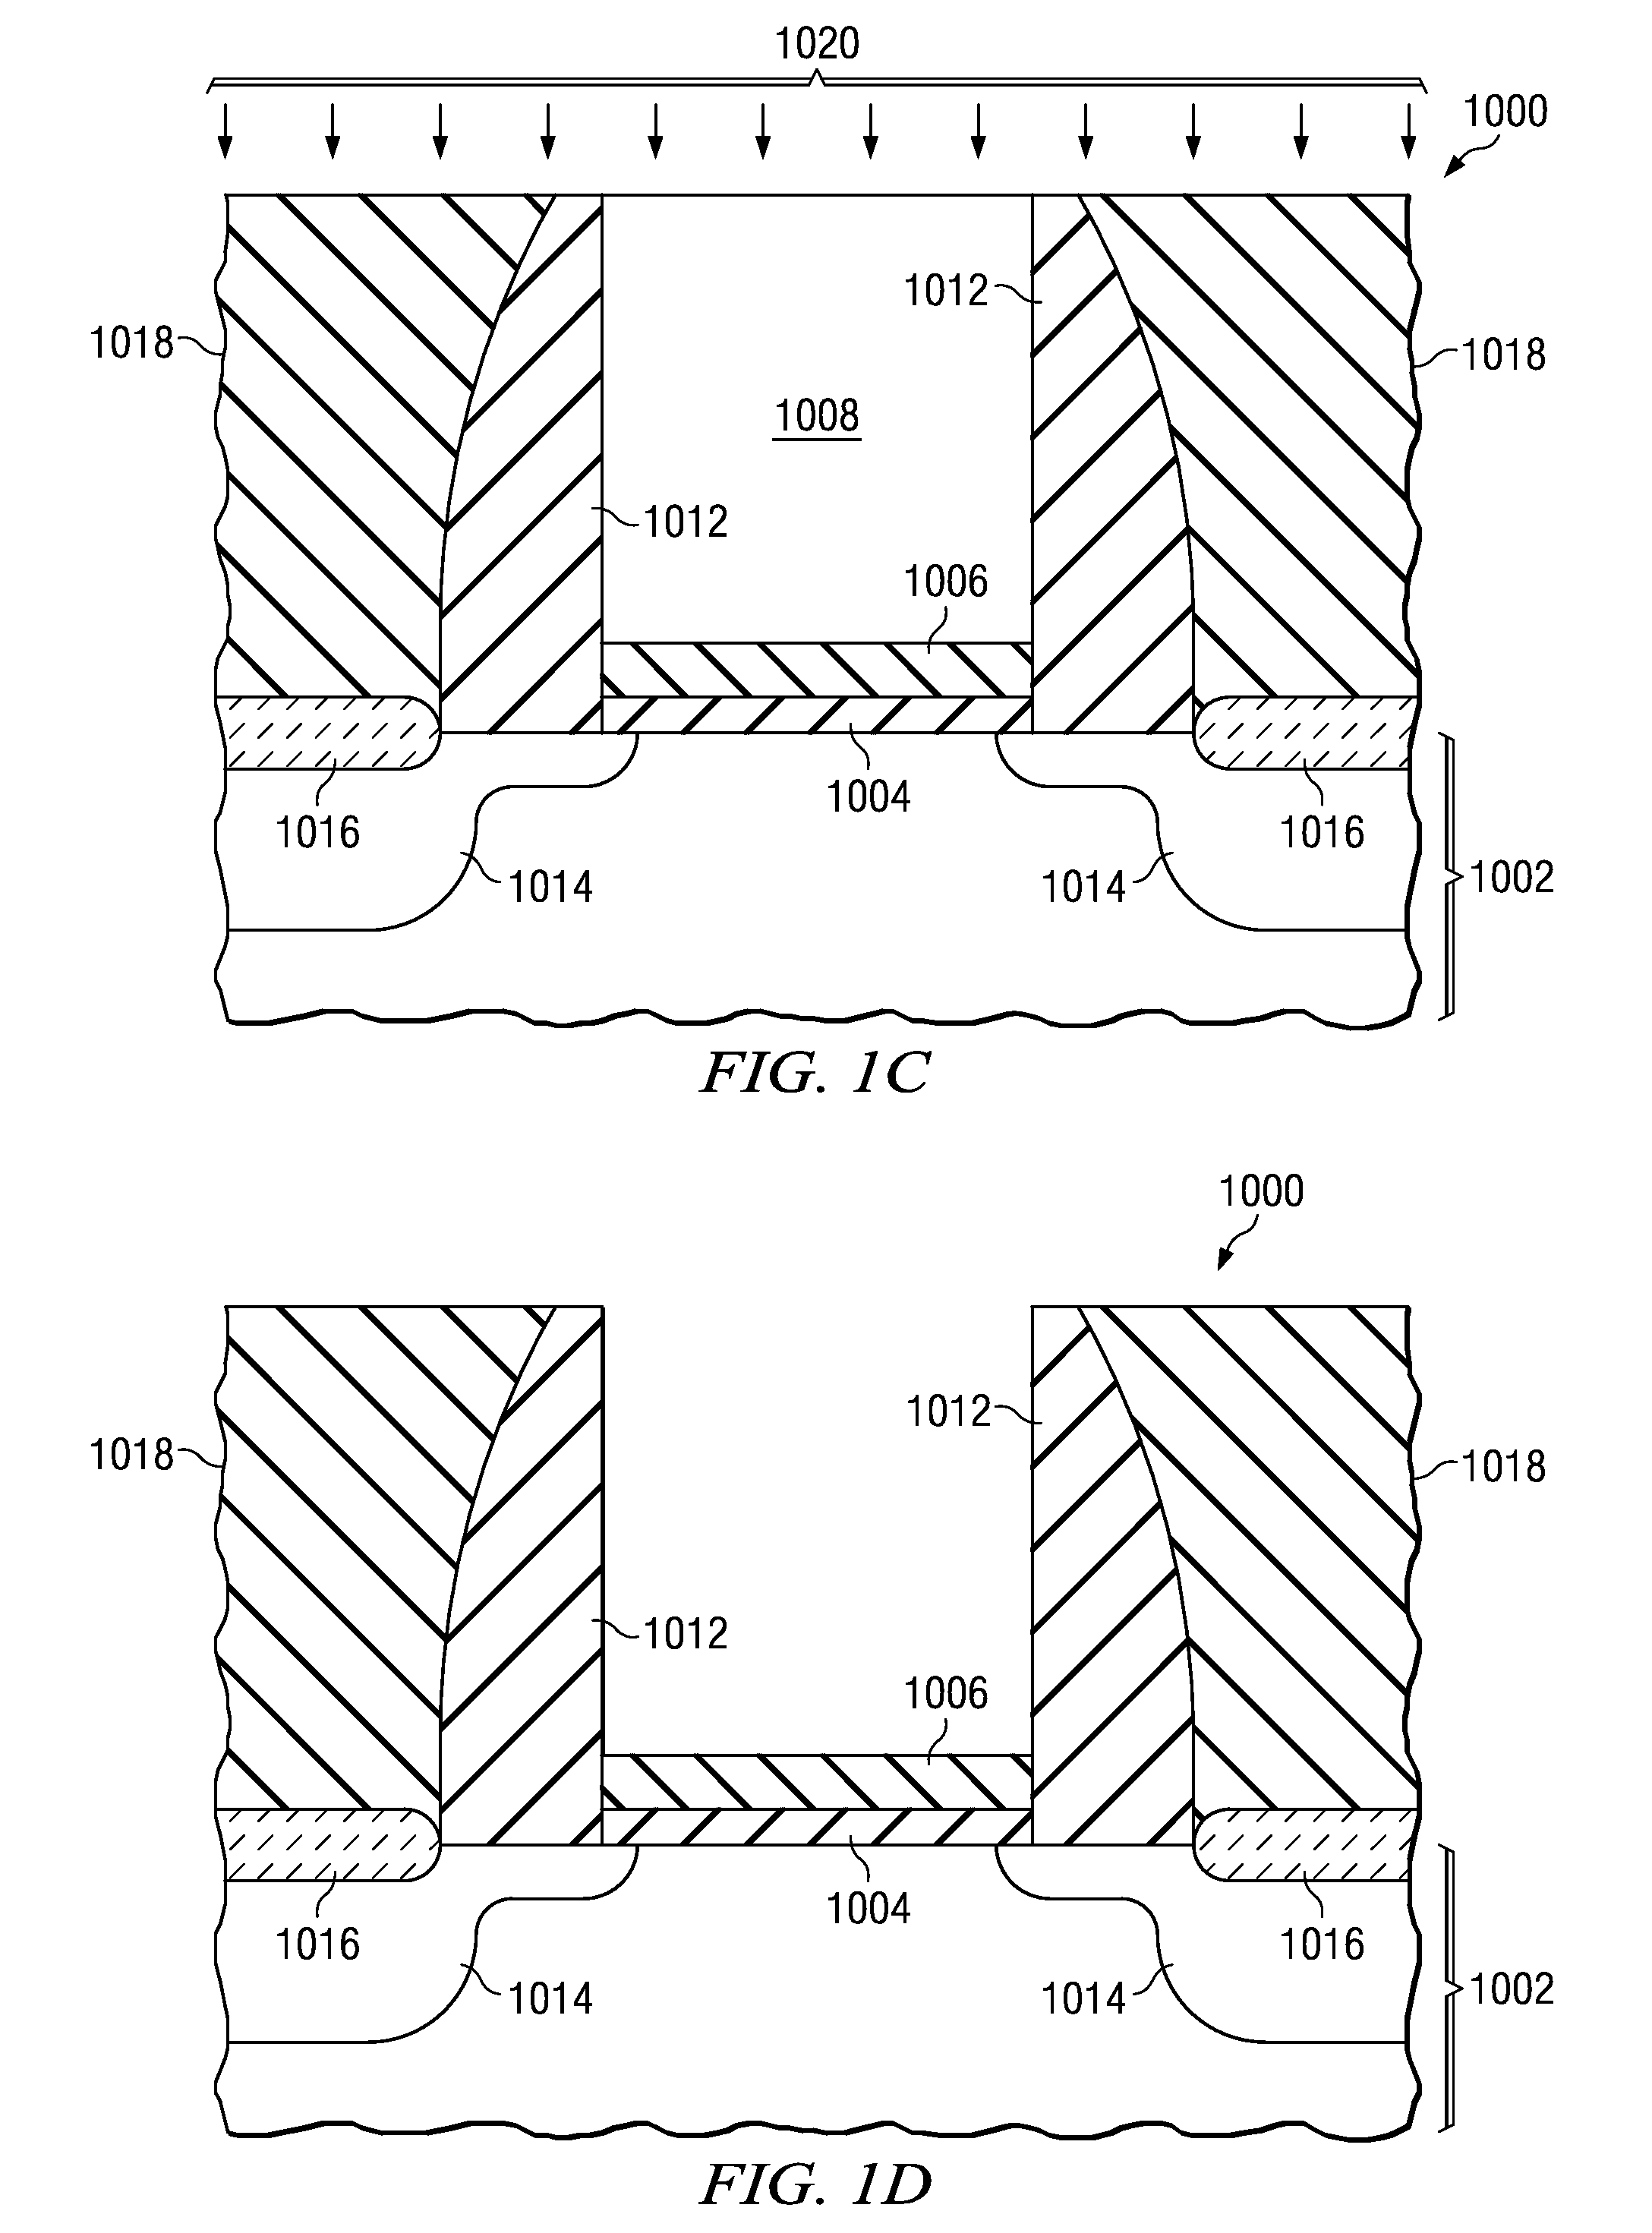 Methods to Enhance Effective Work Function of Mid-Gap Metal by Incorporating Oxygen and Hydrogen at a Low Thermal Budget